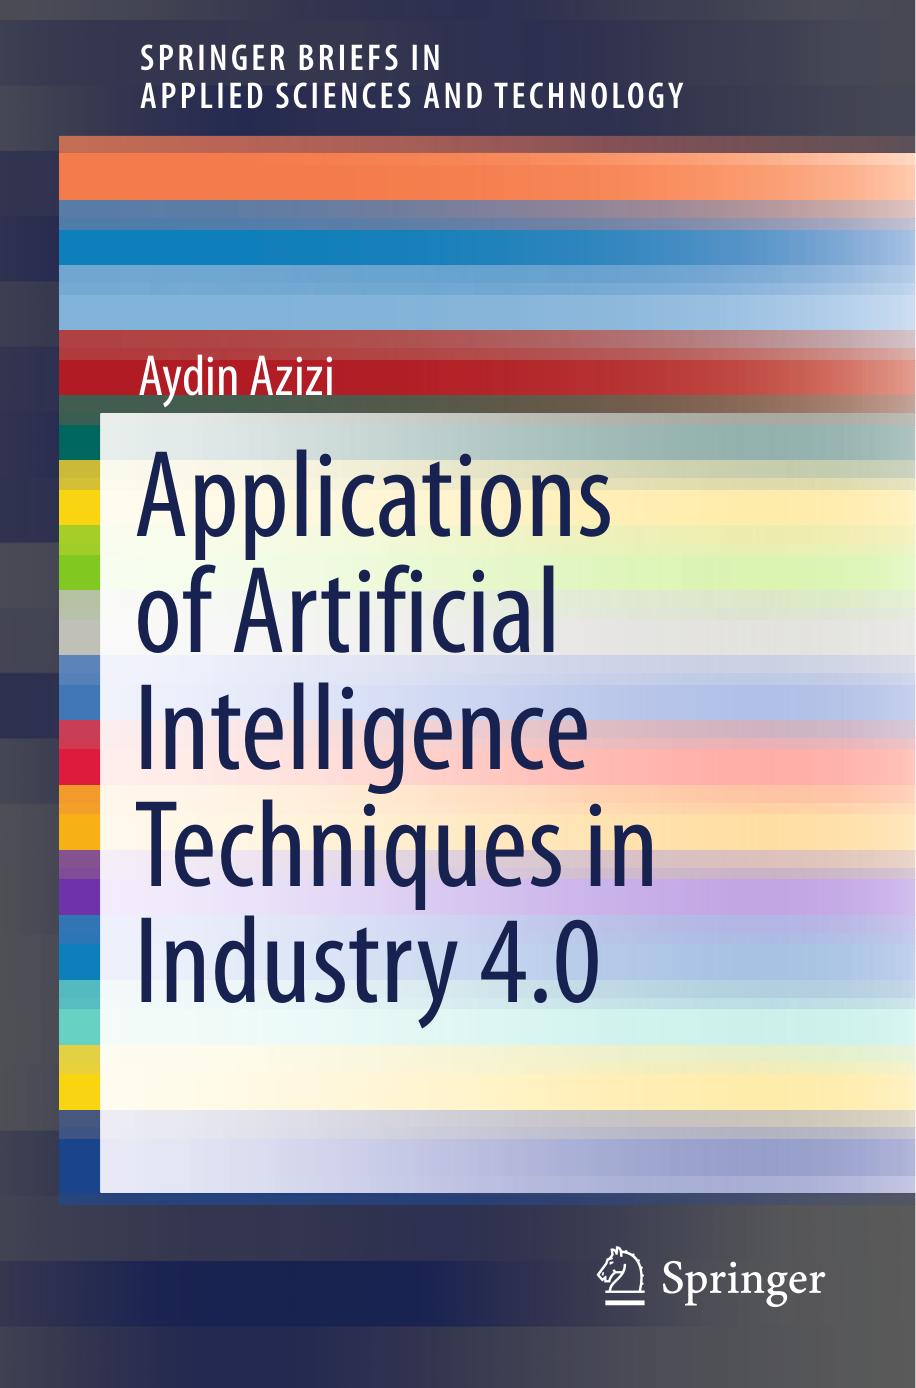 Applications of Artificial Intelligence Techniques in Industry 4.0 by Aydin Azizi